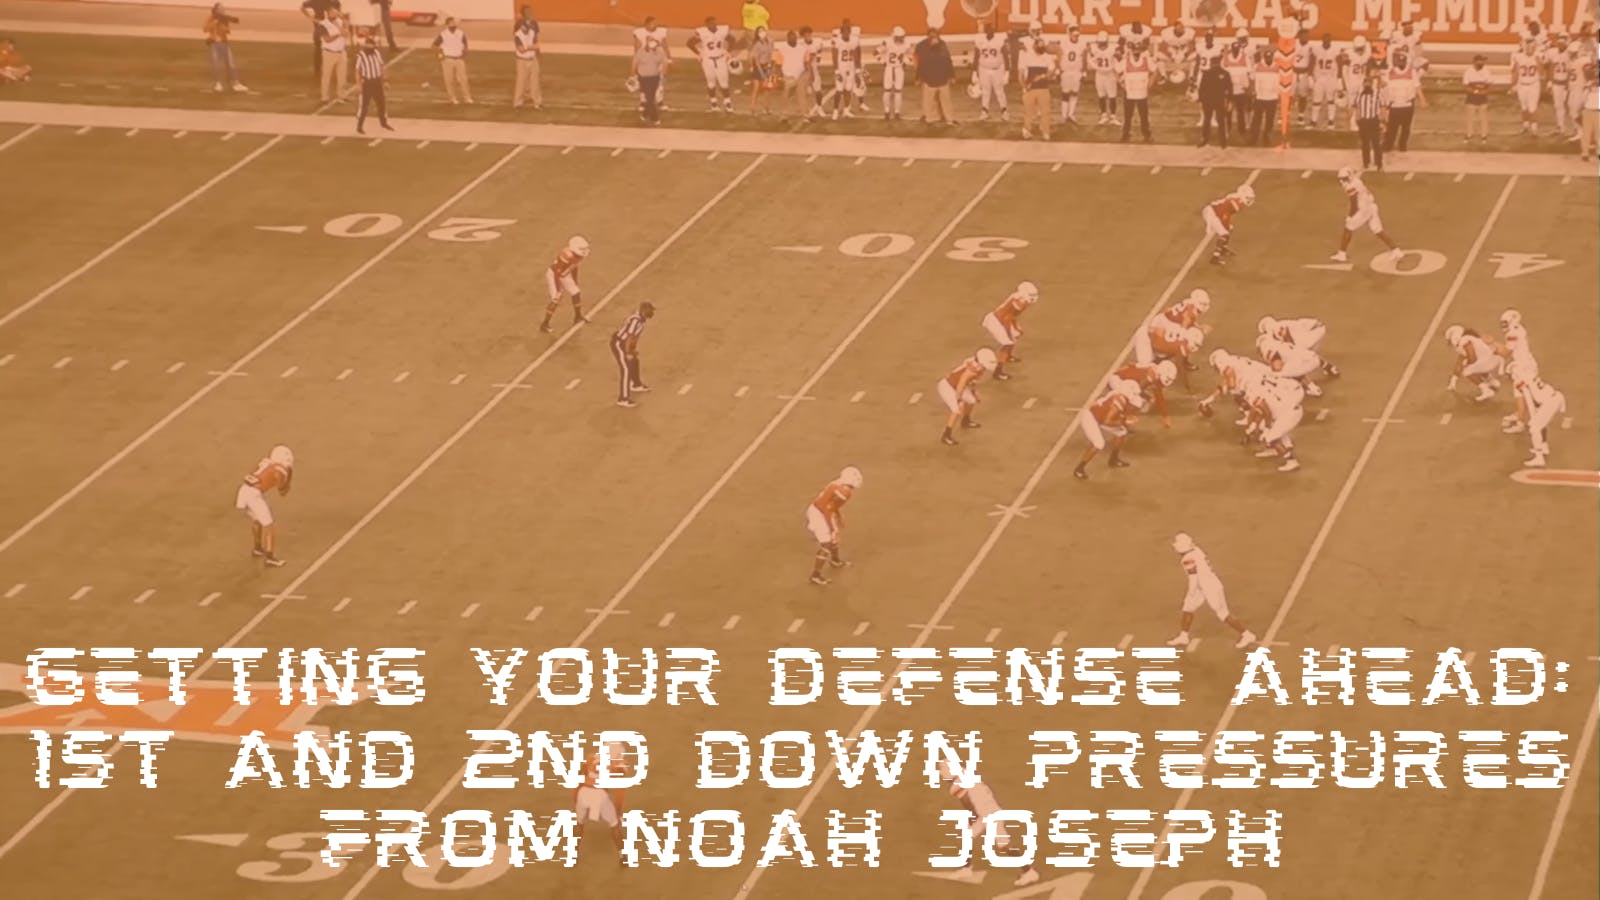 Getting Your Defense Ahead - 1st and 2nd down Pressures from Noah Joseph